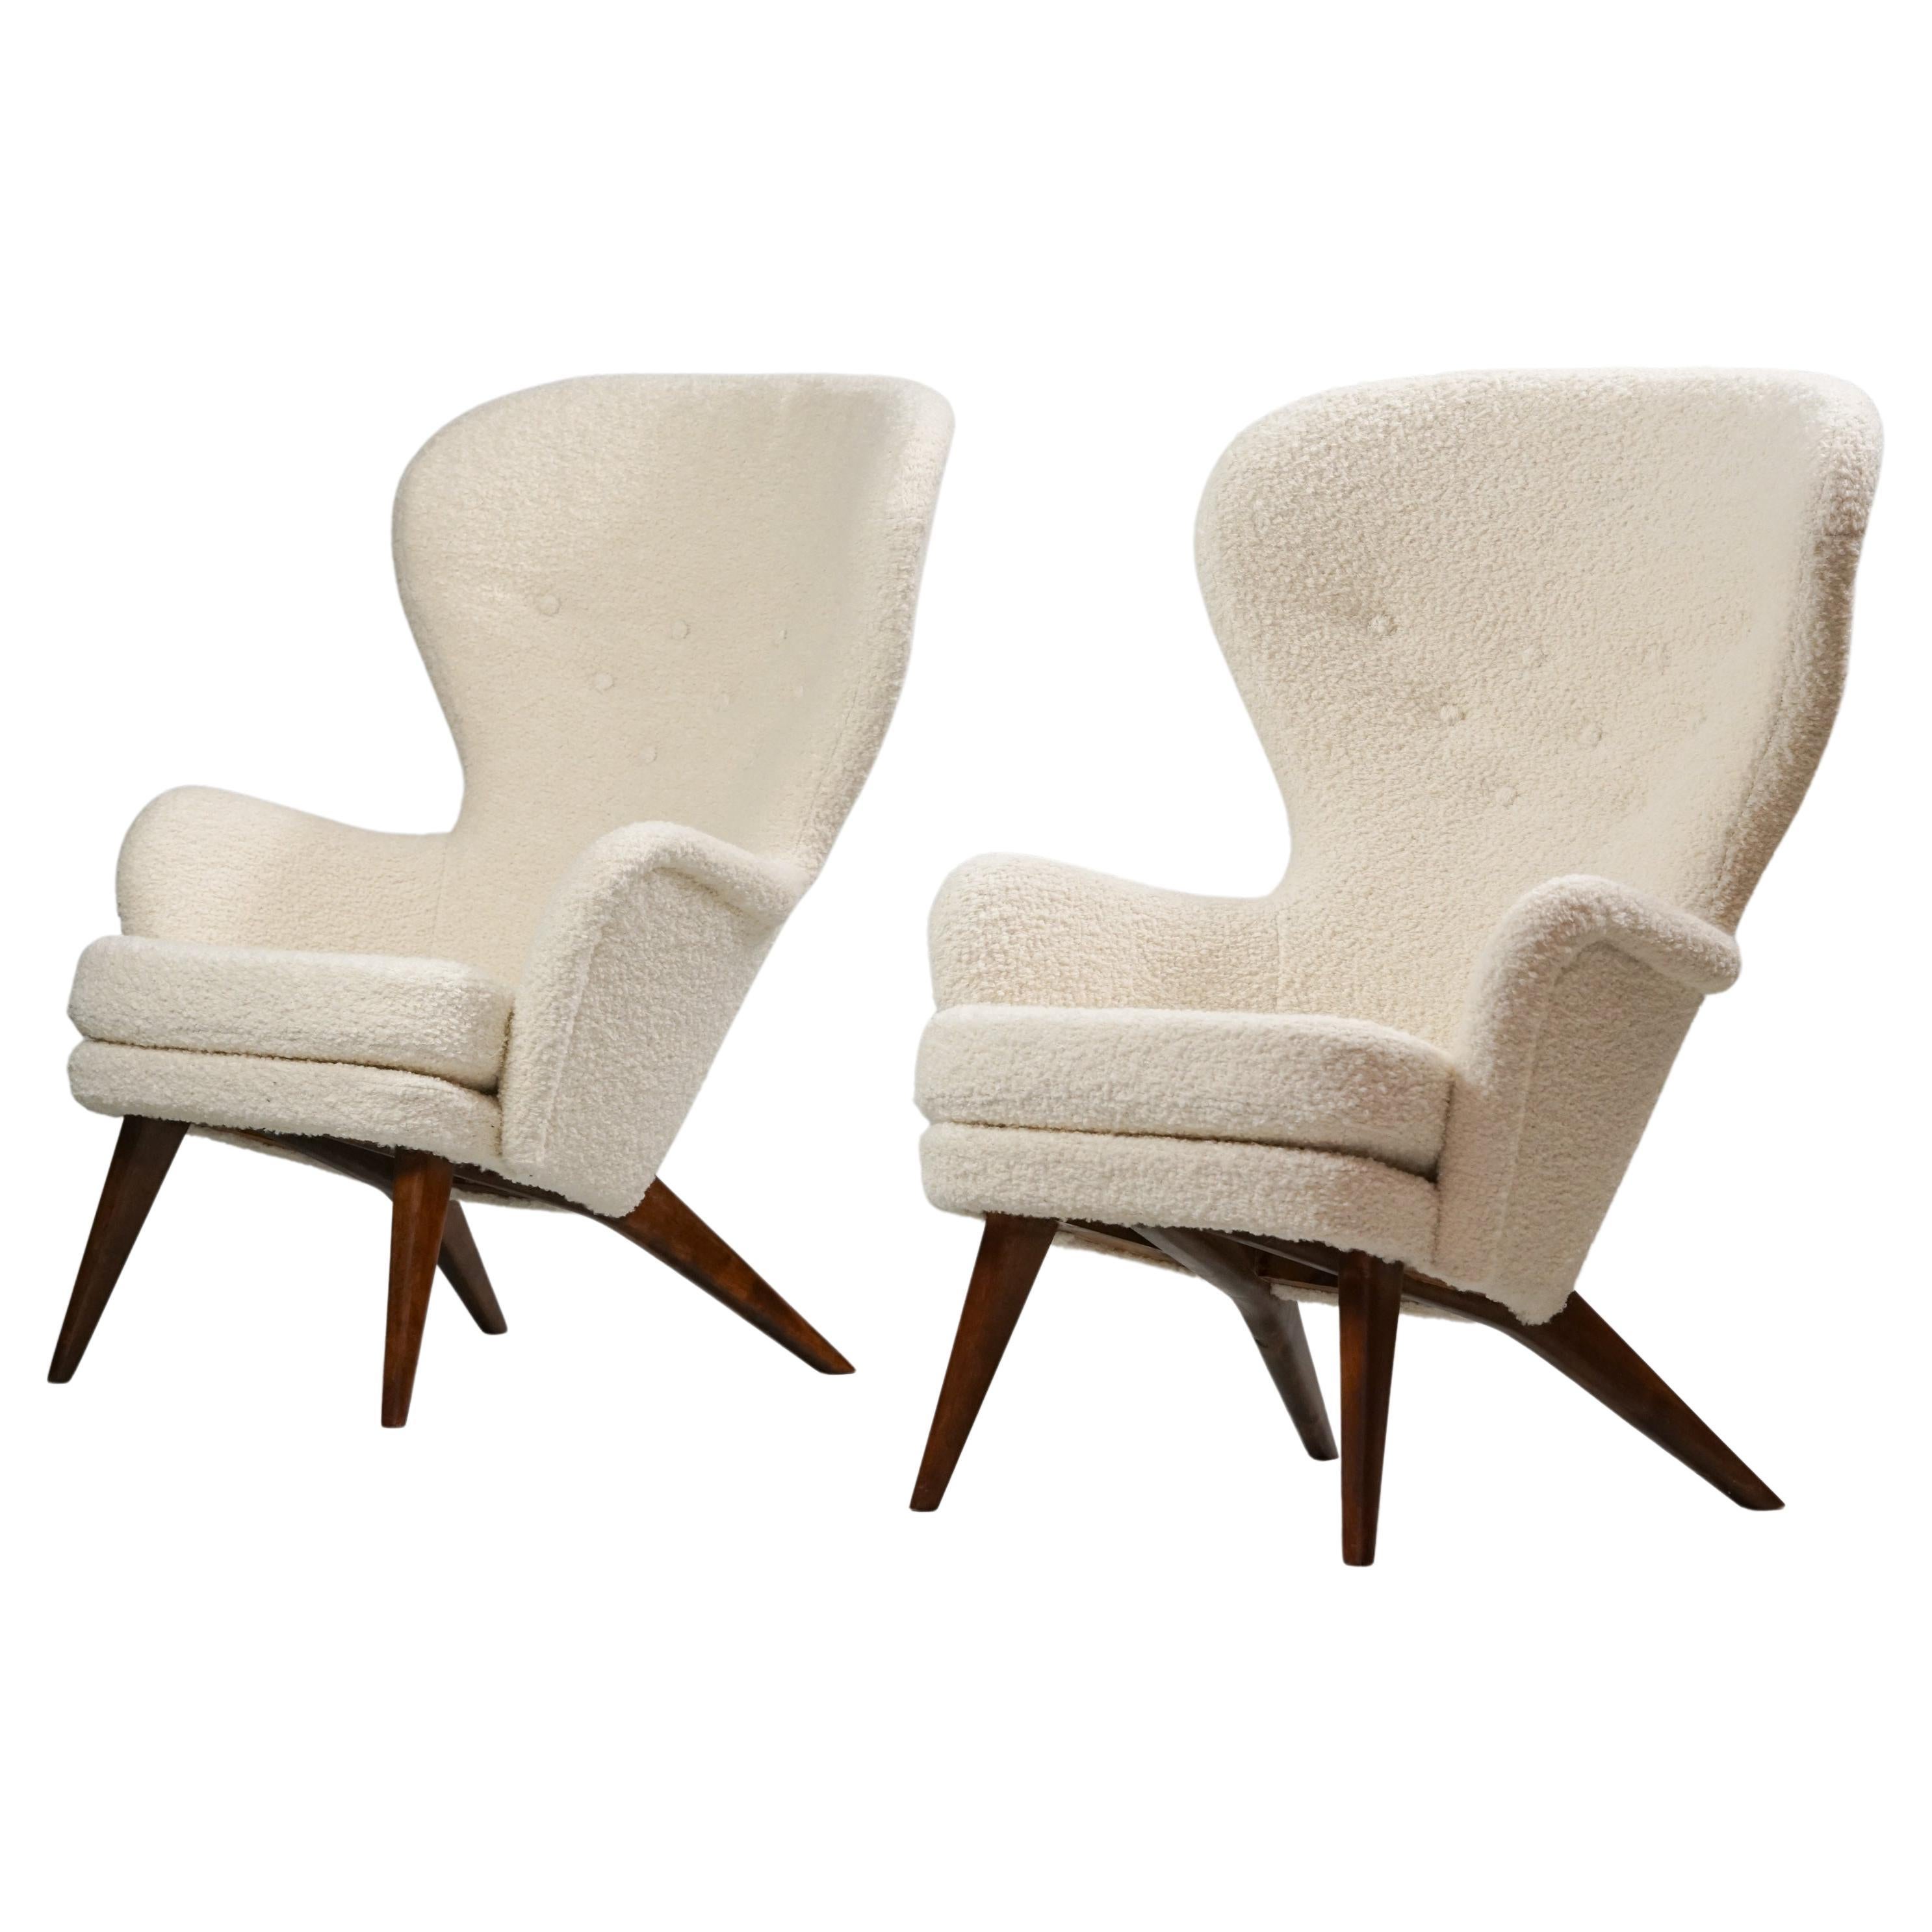 Set of Two Model Siesta Armchairs, Carl Gustaf Hiort af Ornäs, Hiort Tuote, 1950 For Sale